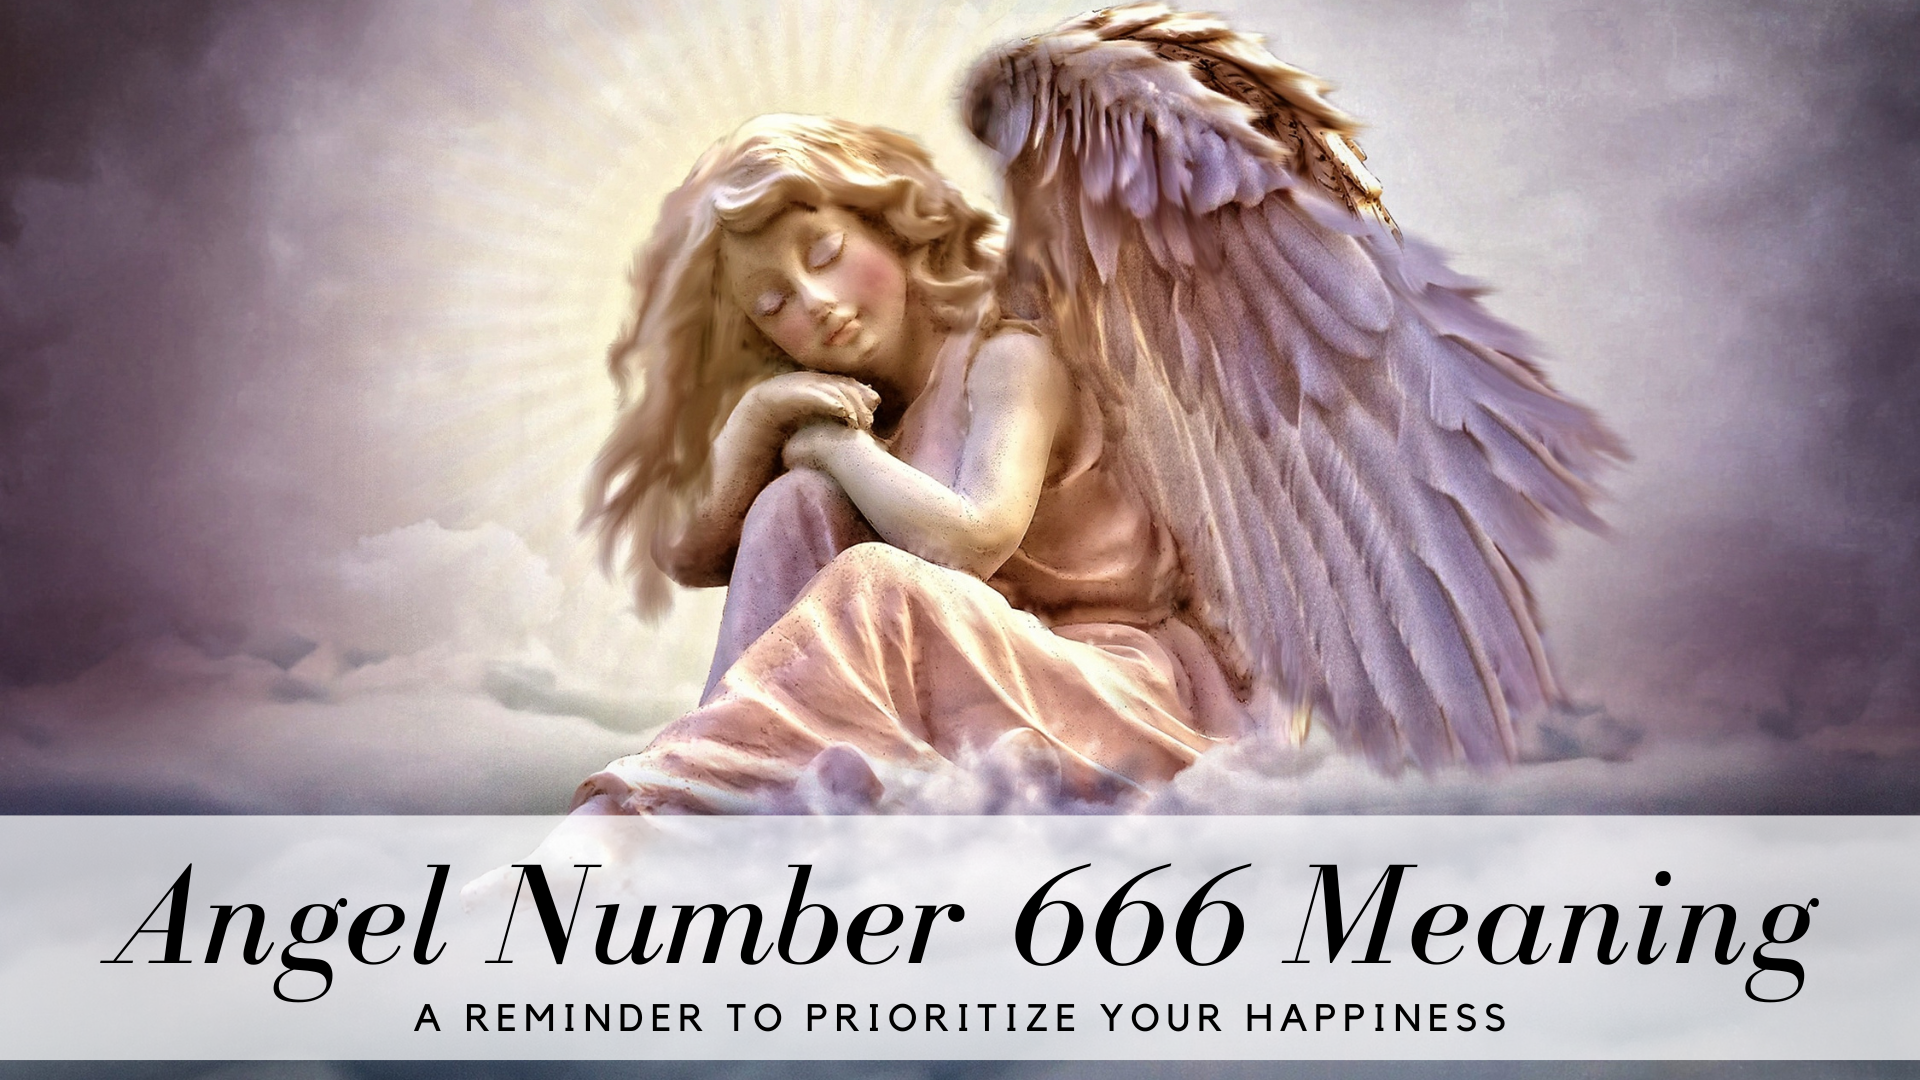 Angel Number 666 Meaning - A Reminder To Prioritize Your Happiness